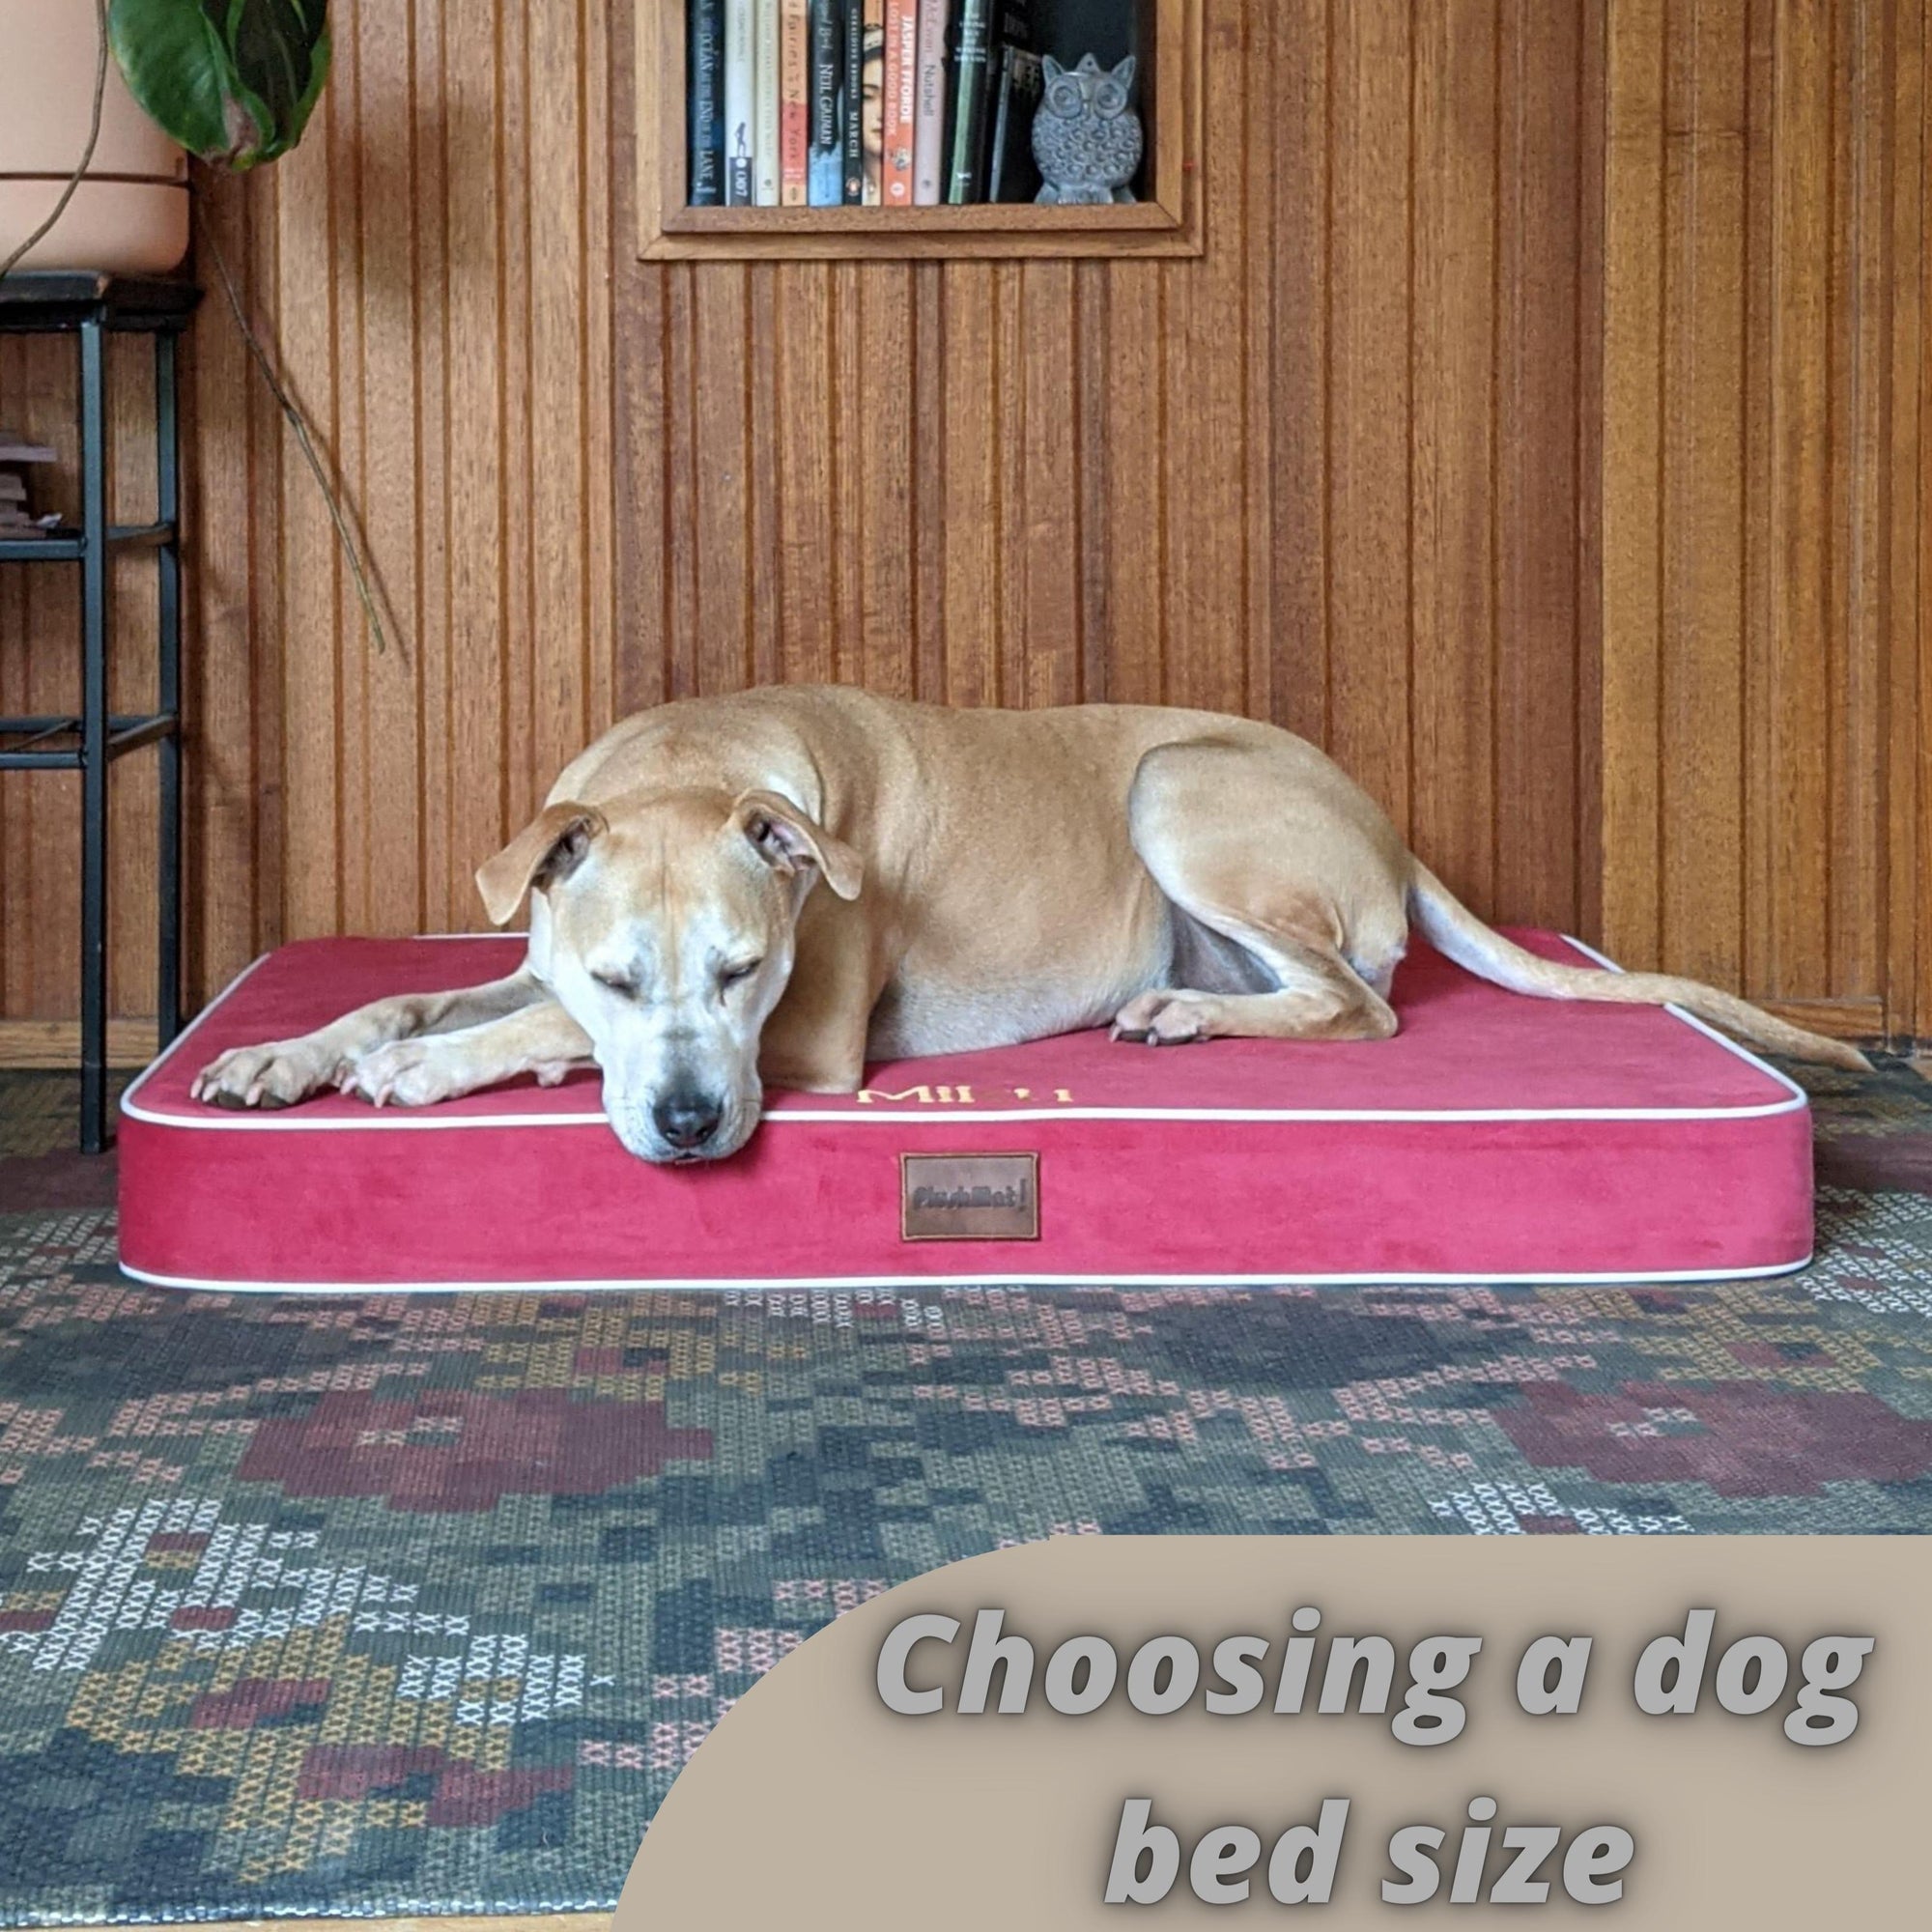 Choosing a dog bed size